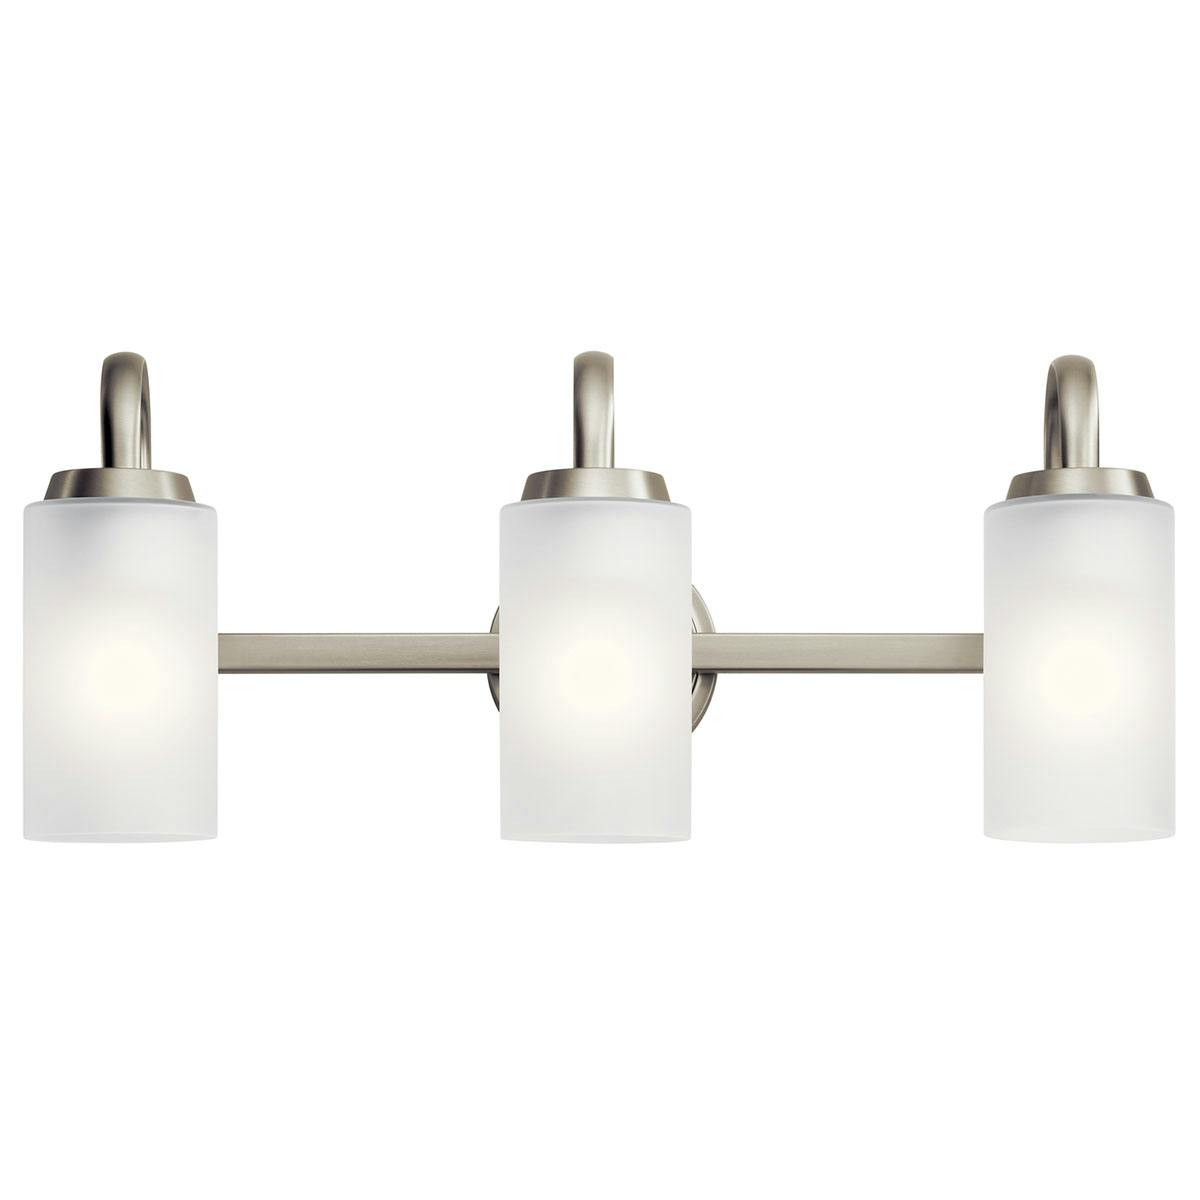 Front view of the Kennewick 3 Light Vanity Light Nickel on a white background